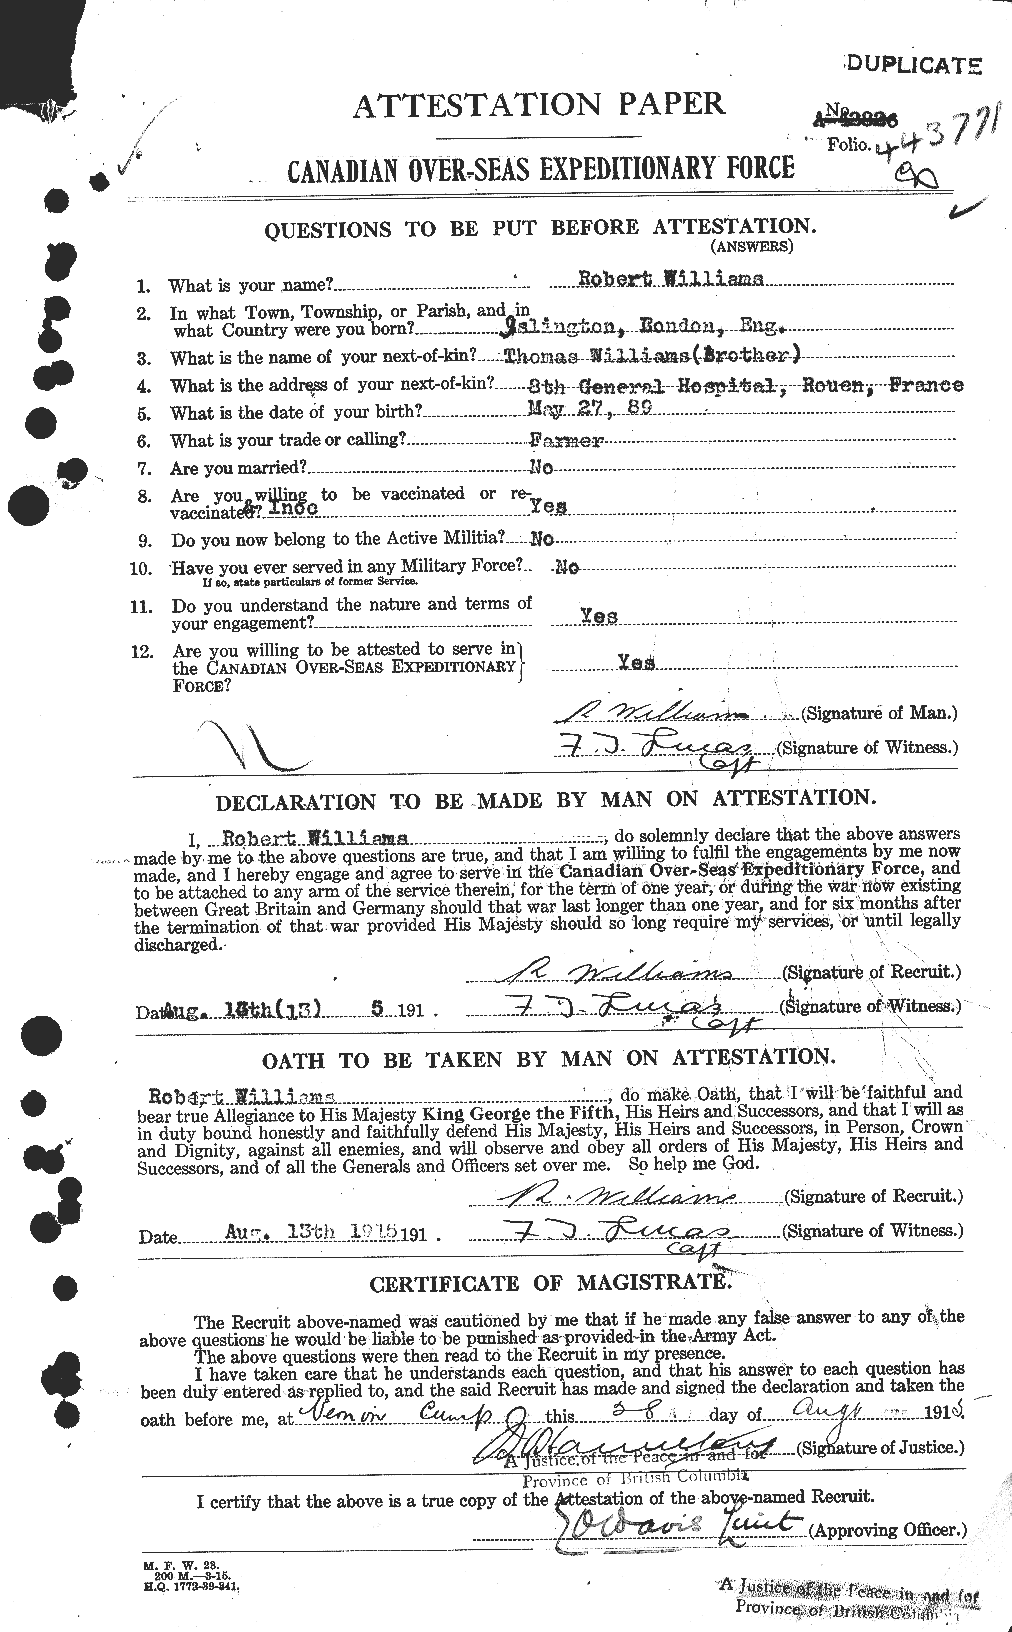 Personnel Records of the First World War - CEF 675711a